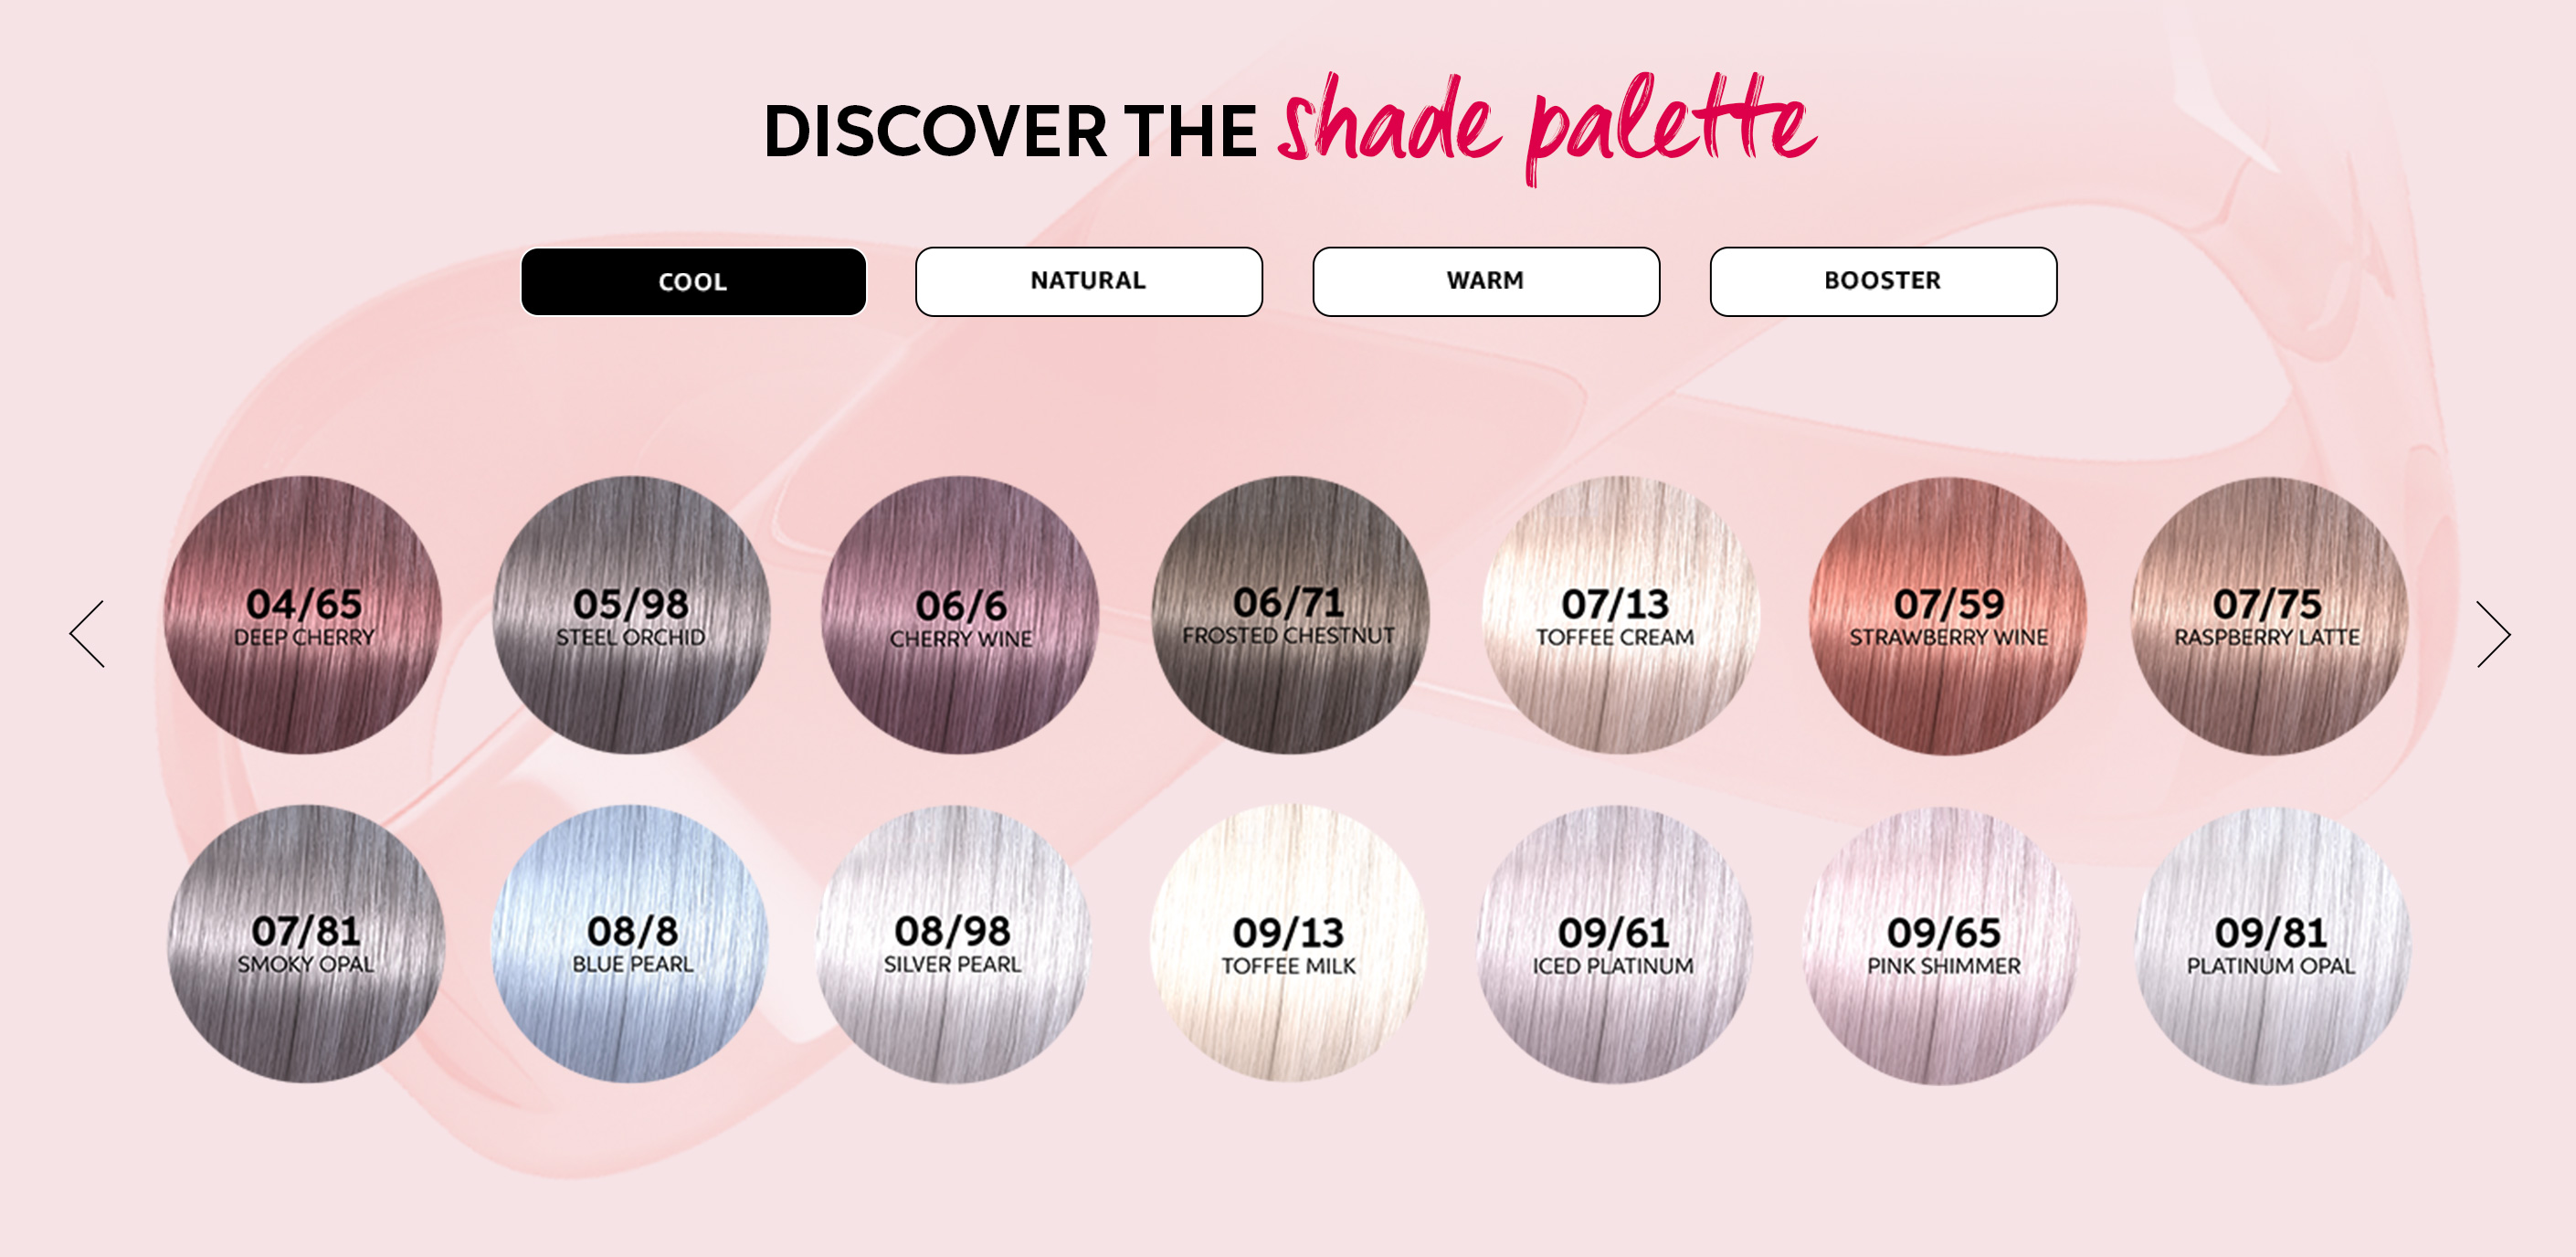 Swatches of the Cool tones from the Wella Shinefinity Glaze shade palette.